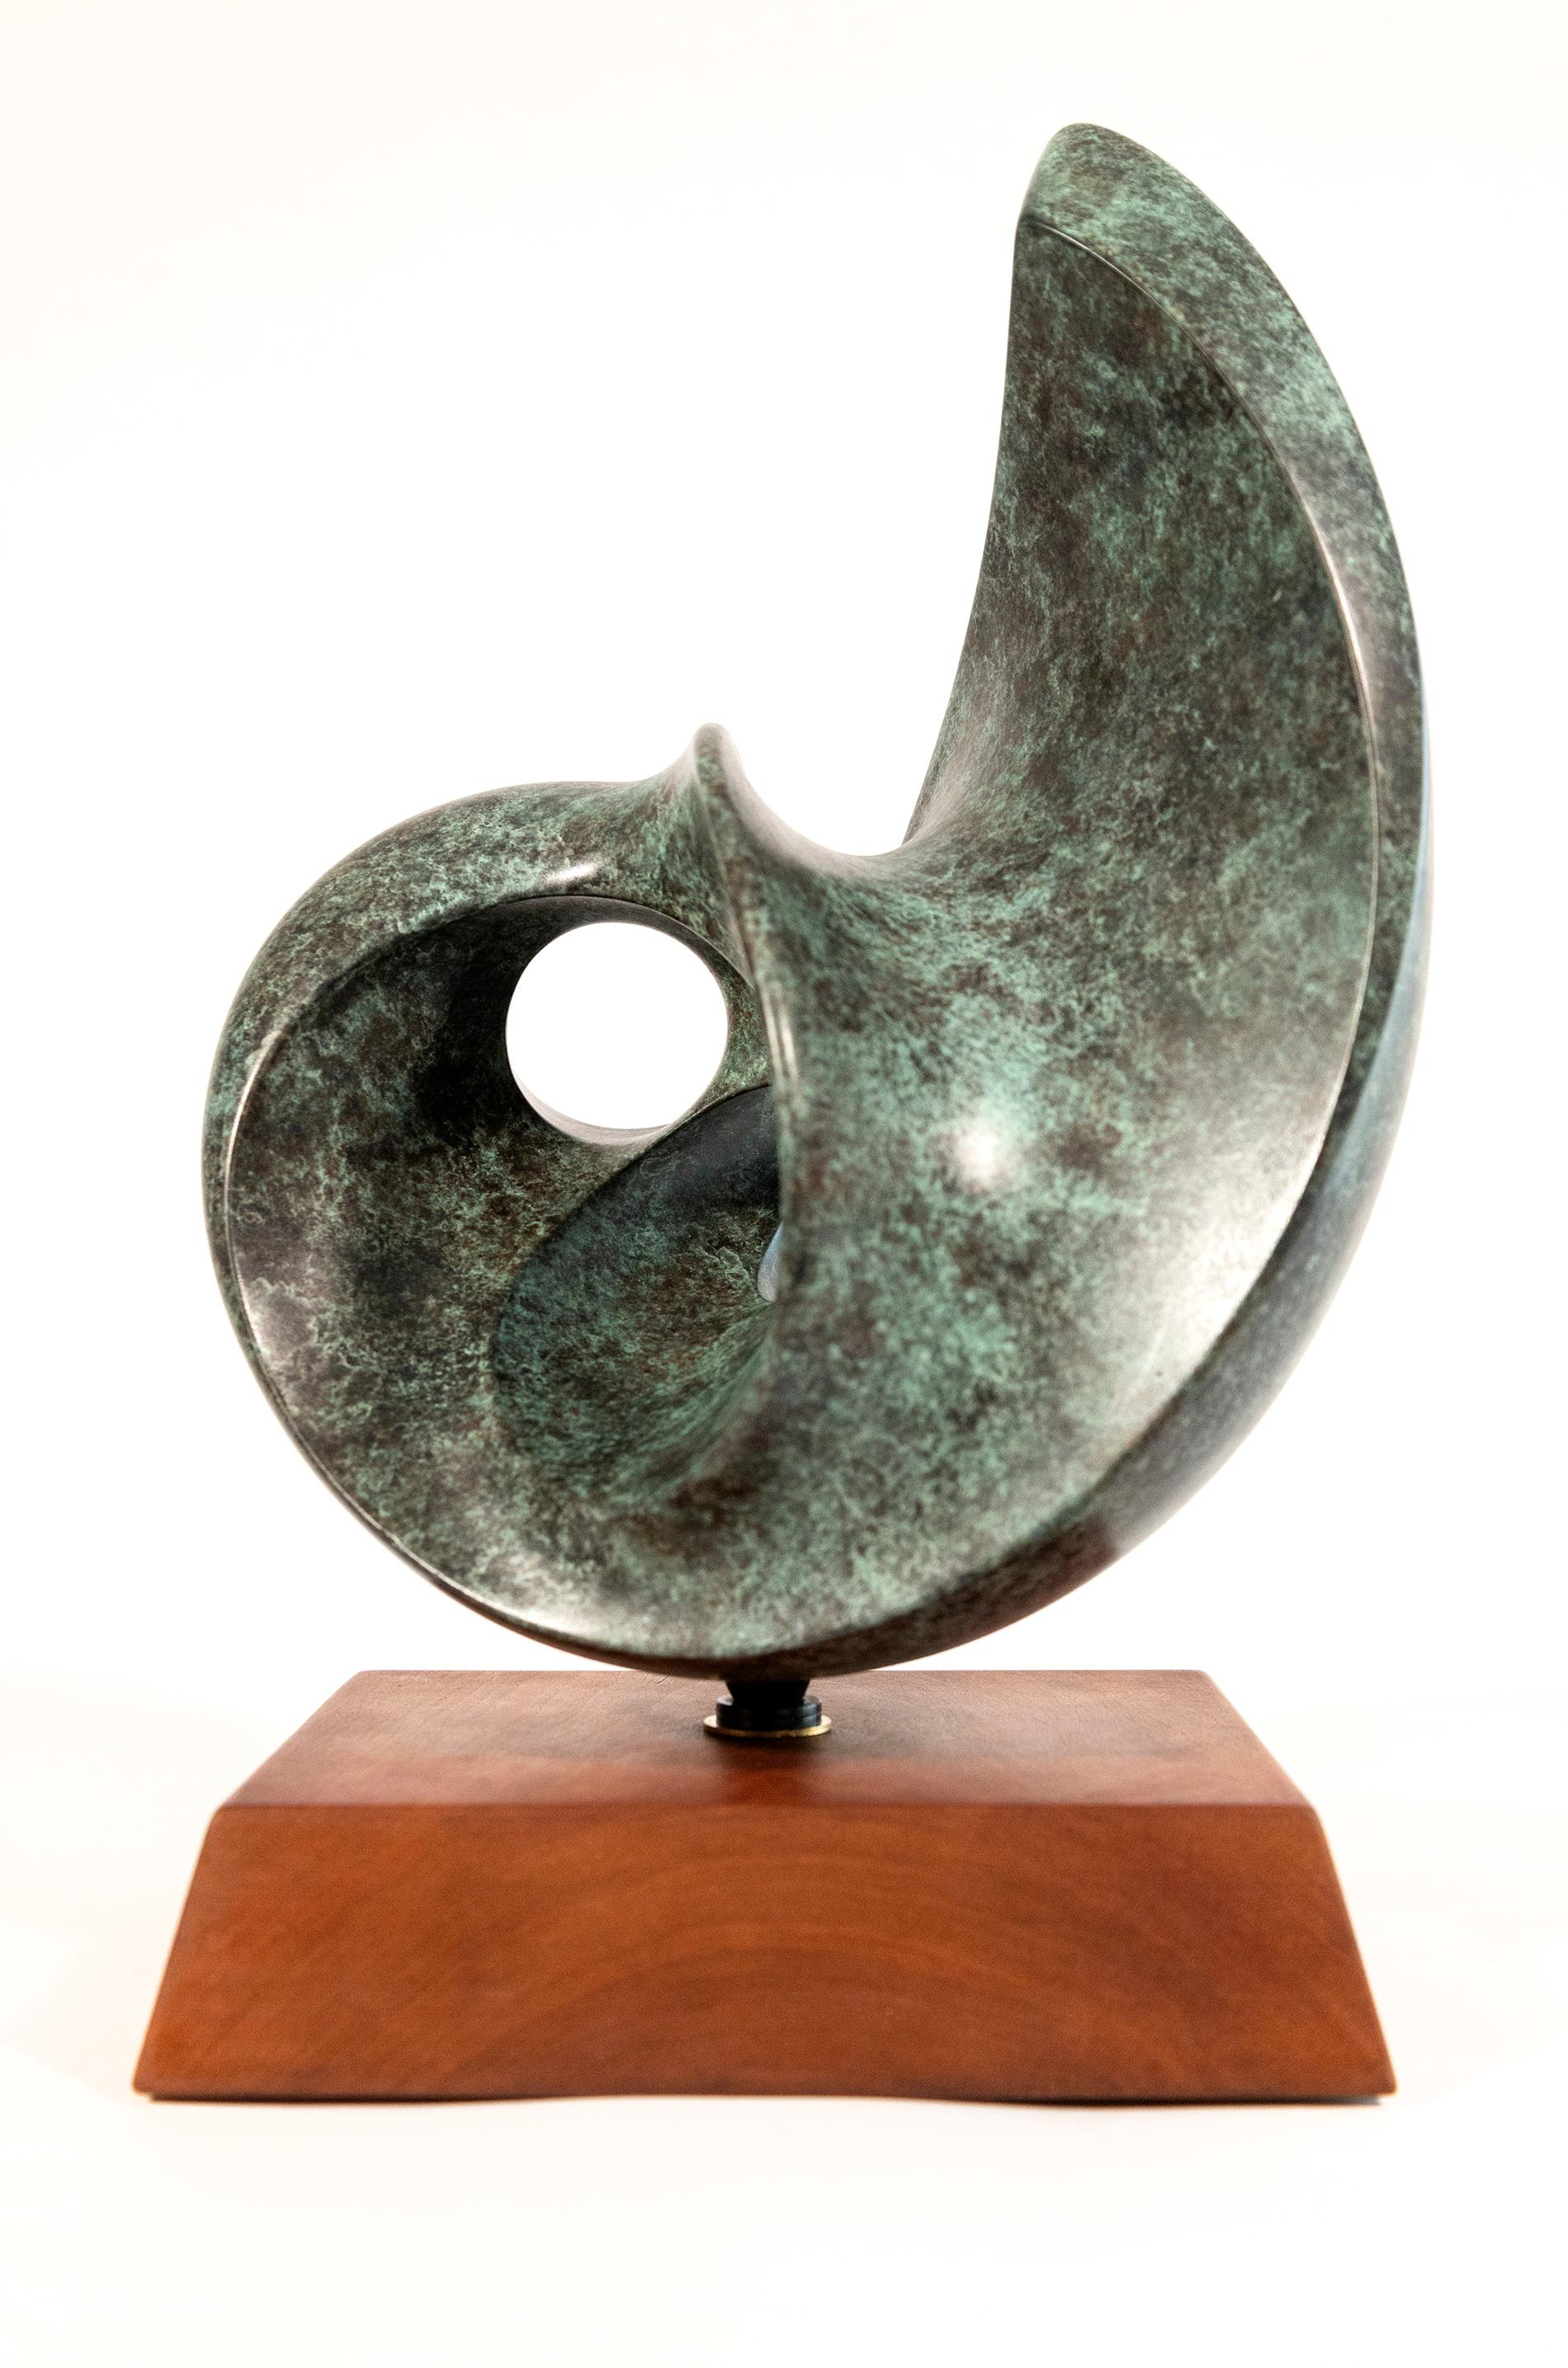 Nocturne Ed. 2/15 - smooth, polished, abstract, bronze sculpture - Abstract Sculpture by David Chamberlain